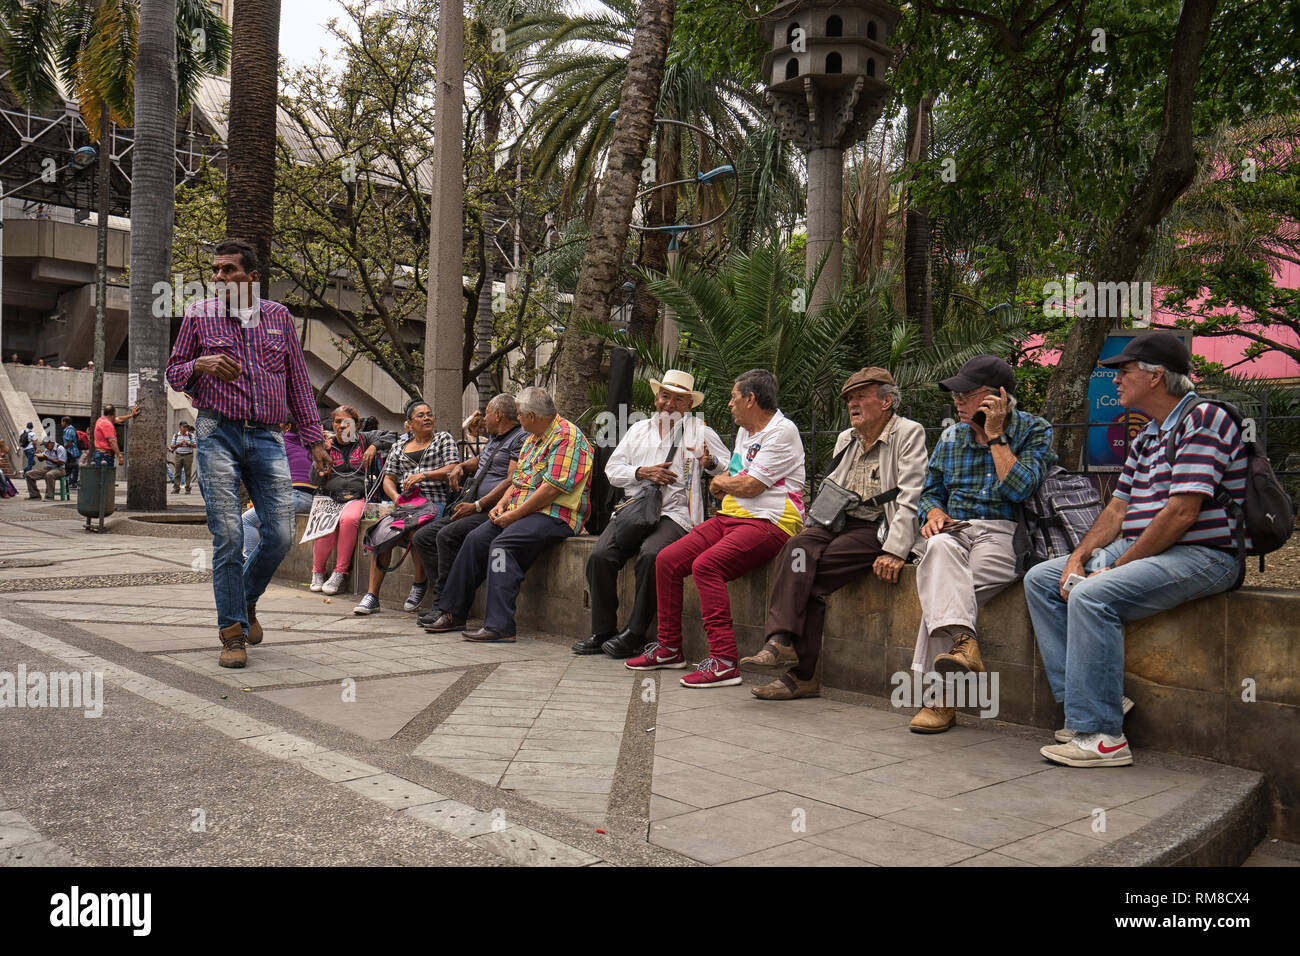 Medellin, Colombia - July 23, 2018: people sitting in Berrio park, a popular meeting place Stock Photo